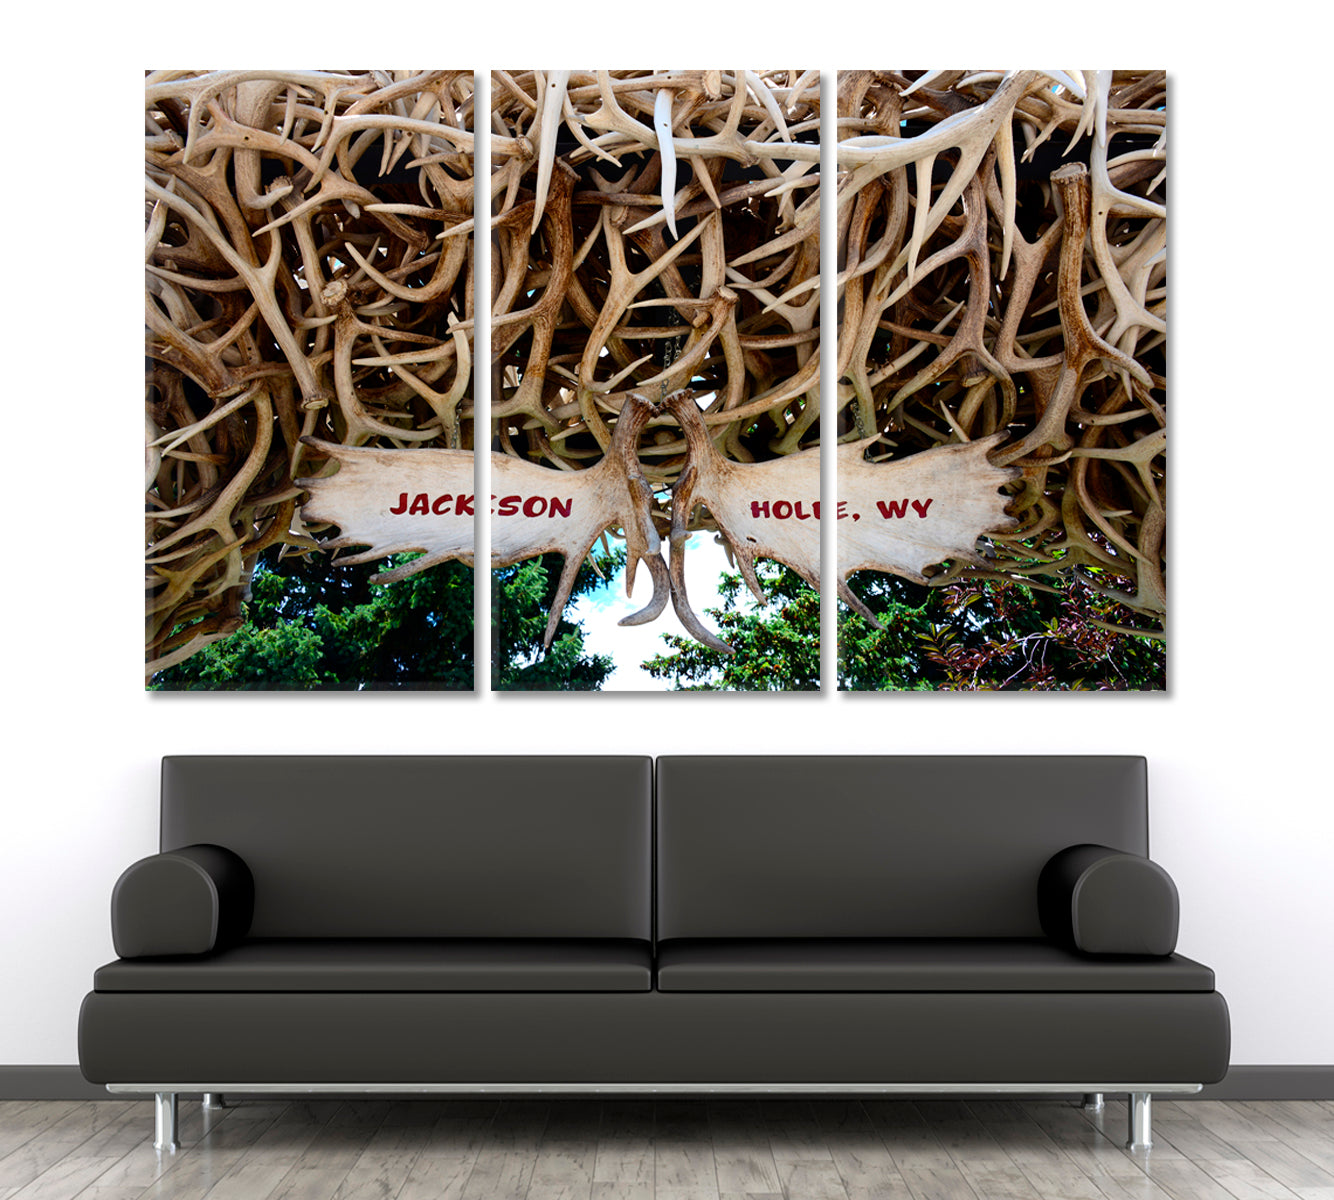 Famous Jackson Hole Elk Antler Arches Wyoming Black and White Wall Art Print Artesty 3 panels 36" x 24" 